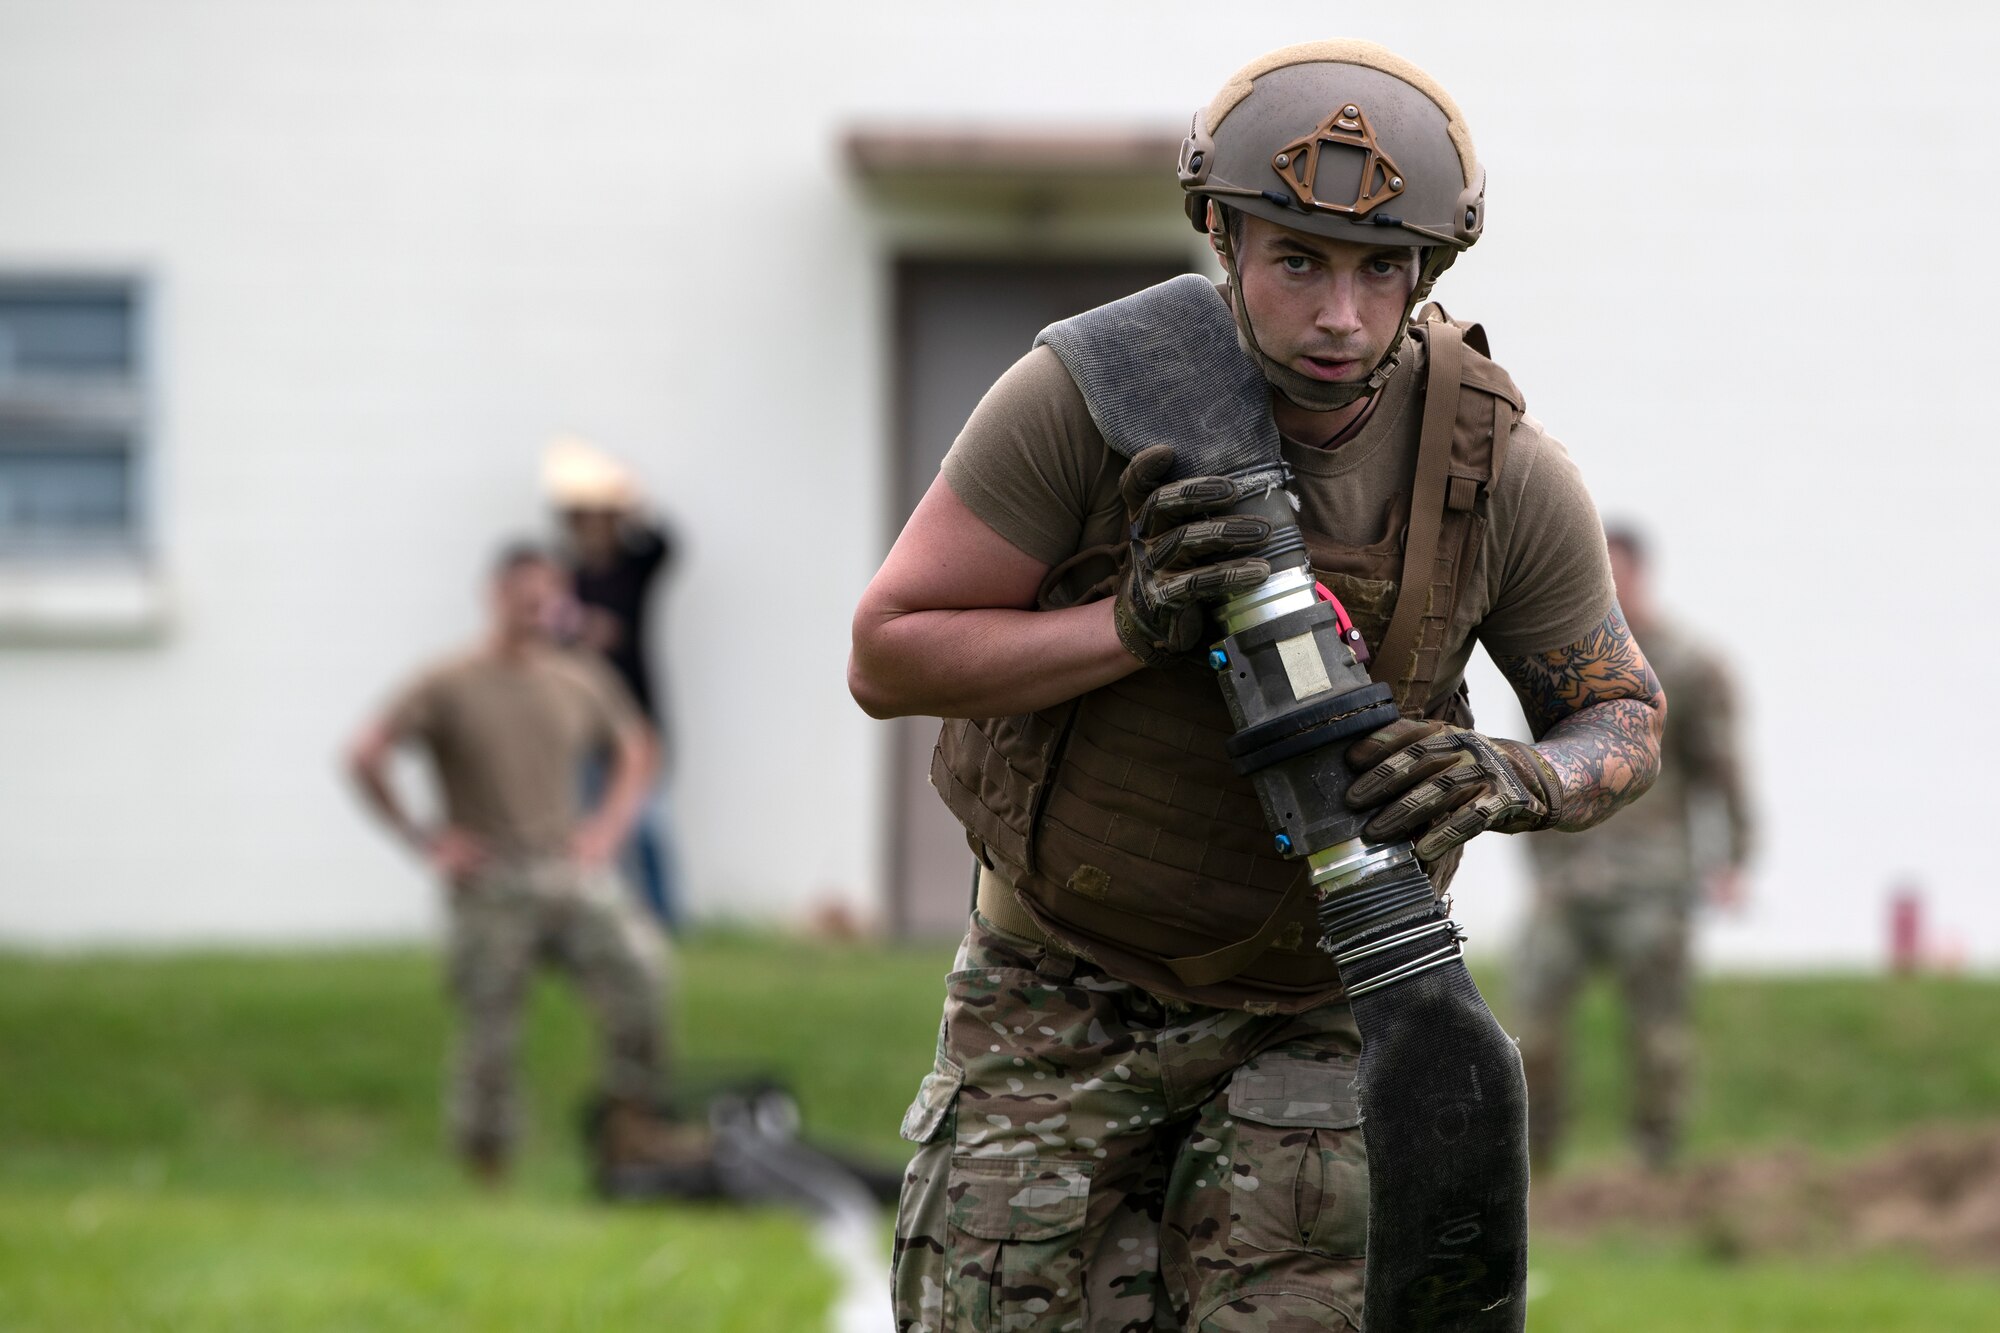 U.S. Air Force Staff Sgt. Lucas Berg, 18th Logistics Readiness Squadron fuels training and support supervisor, drags a 300 foot hose during tryouts for the Forward Area Refueling Point team at Kadena Air Base, Japan, Oct. 21, 2022. The trials are designed to push Airmen beyond their exhaustion point, allowing the FARP team to effectively identify candidates with the potential to withstand the rigors of special operations missions. (U.S. Air Force photo by Senior Airman Jessi Roth)